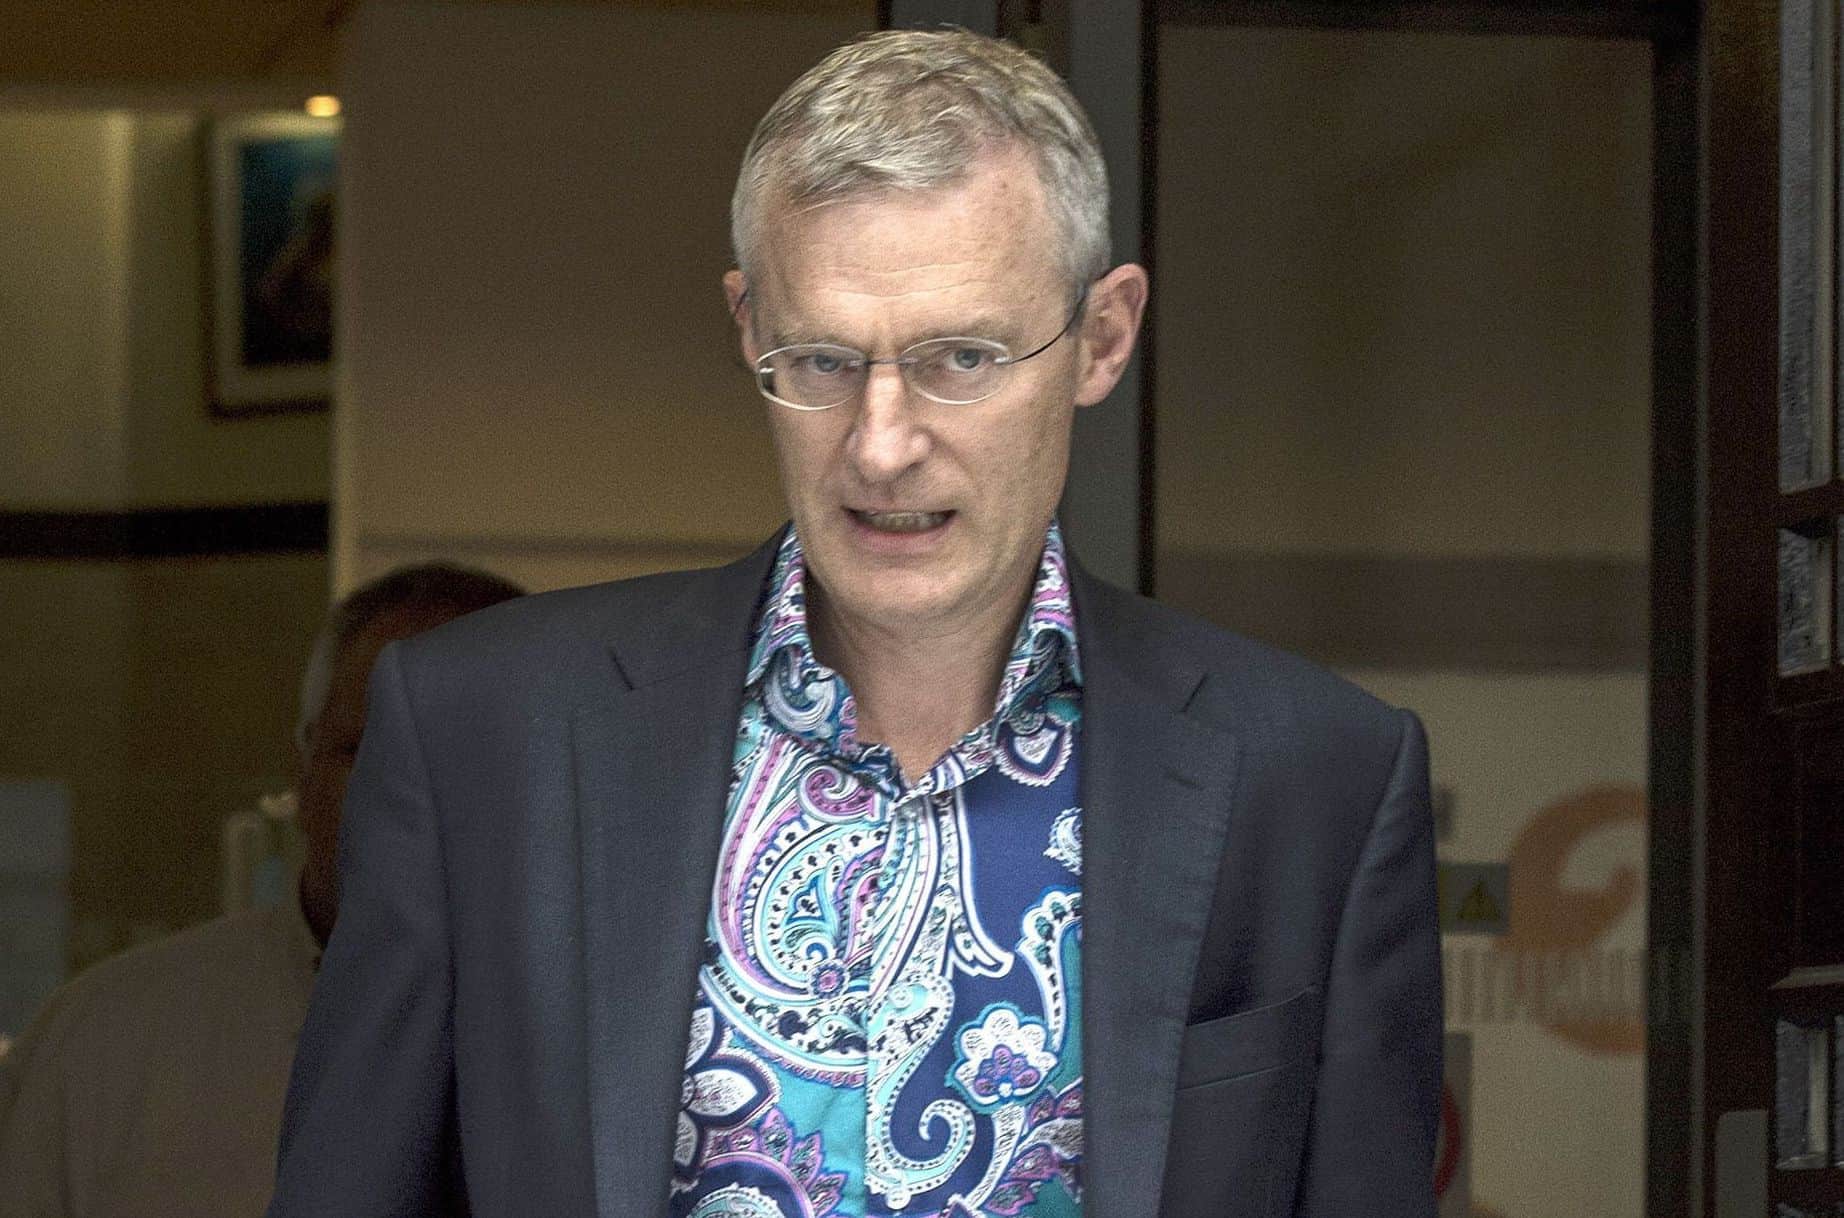 Watch: ‘We know where everbody lives’ – Jeremy Vine’s concerning thread as anti-vaxxers turn up at his home